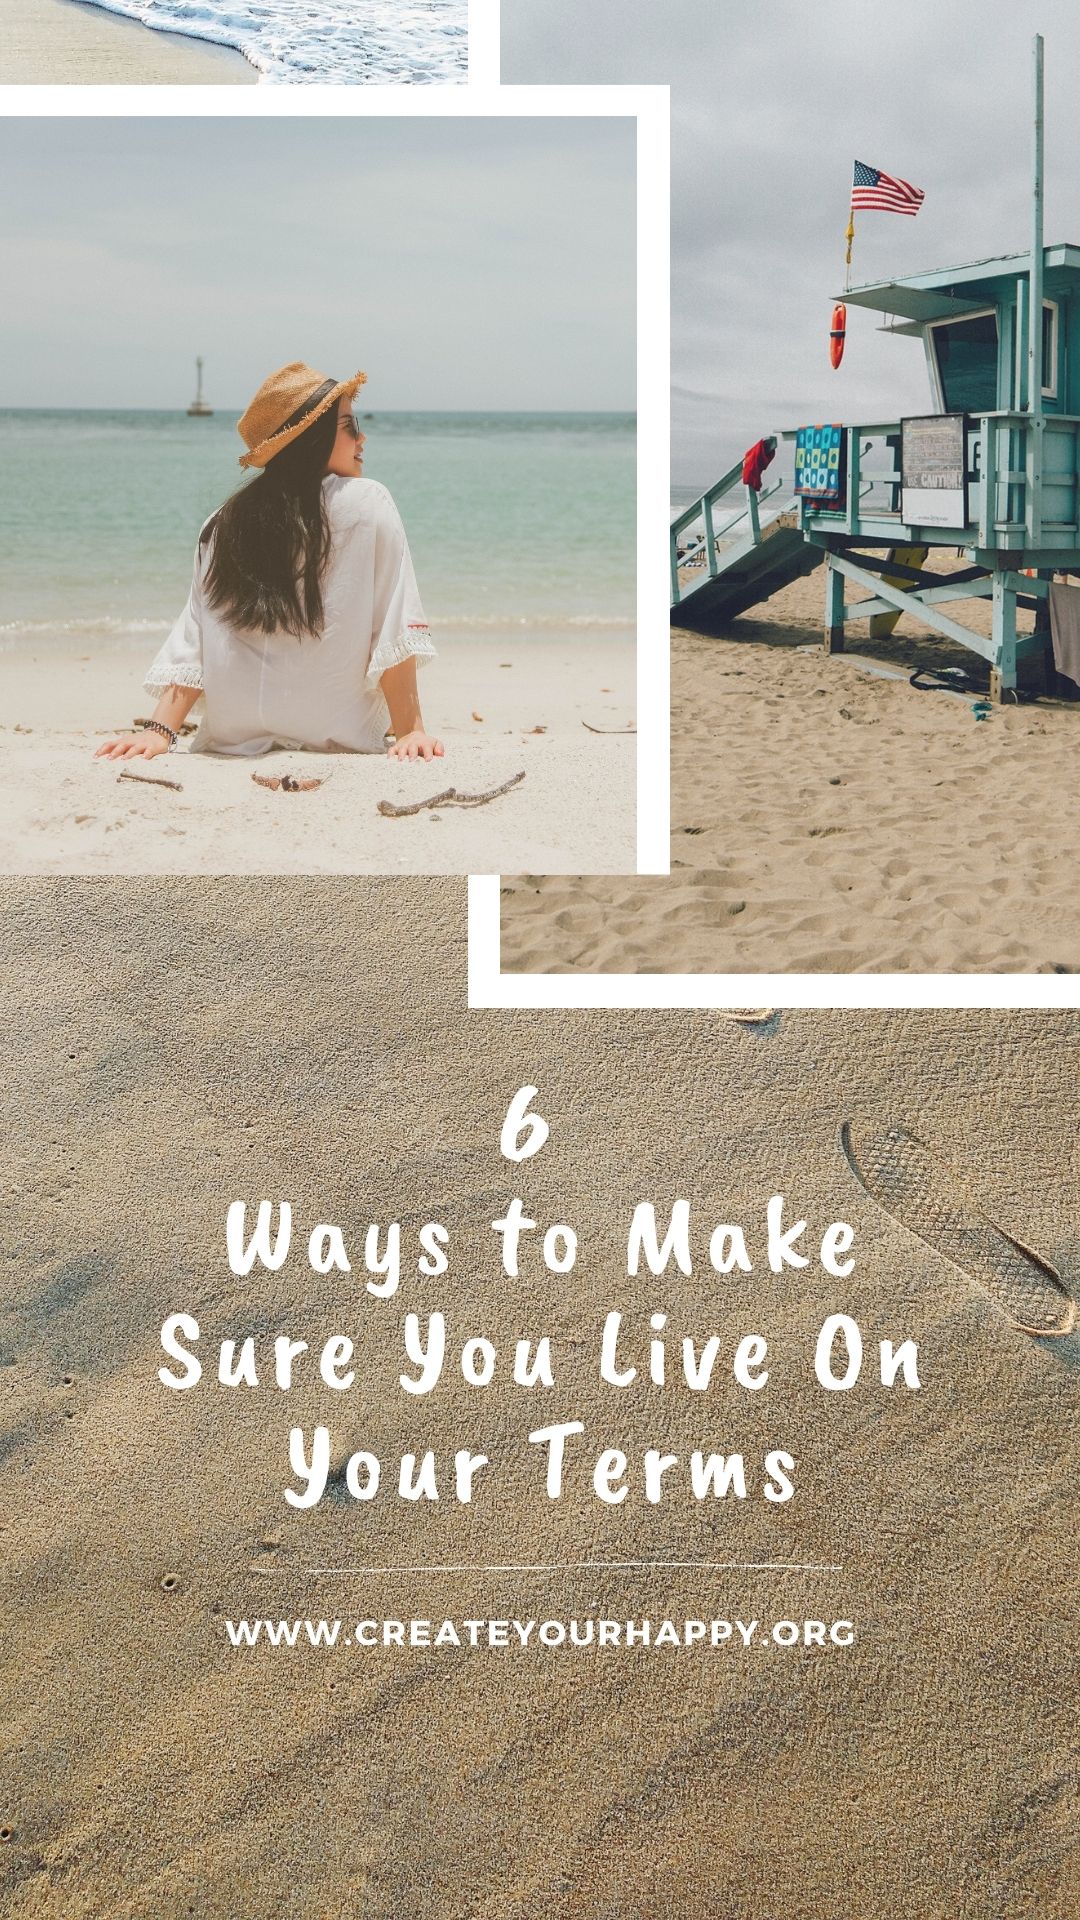 6 Ways to Make Sure You Live On Your Terms